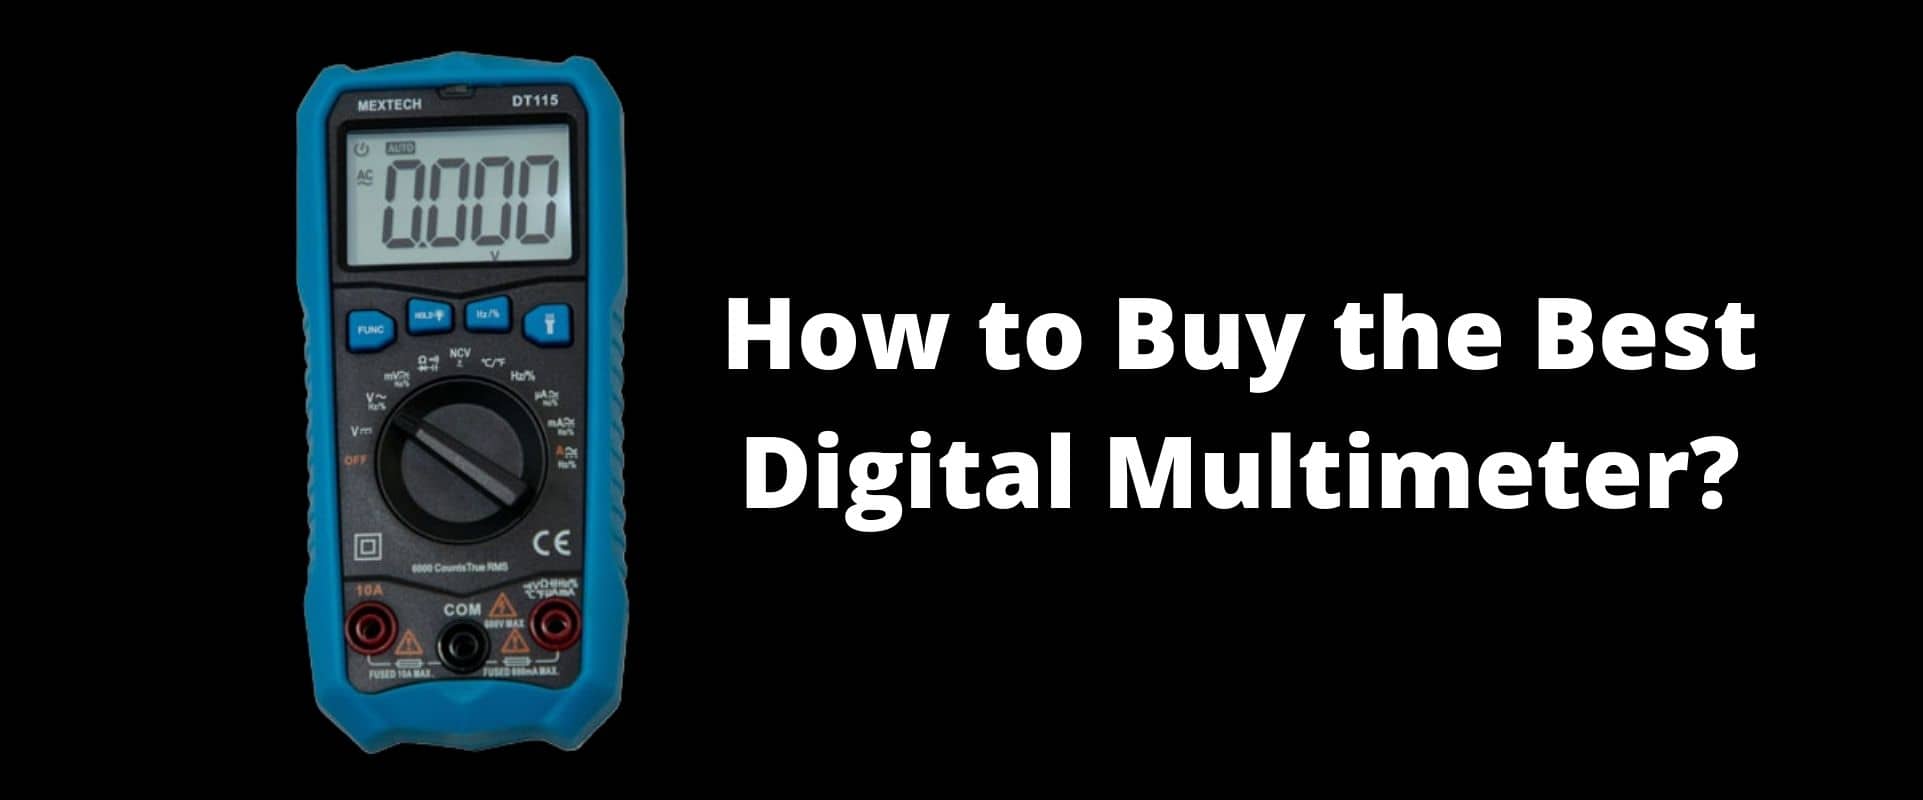 How to Choose the Best Digital Multimeter? – Buying Guide